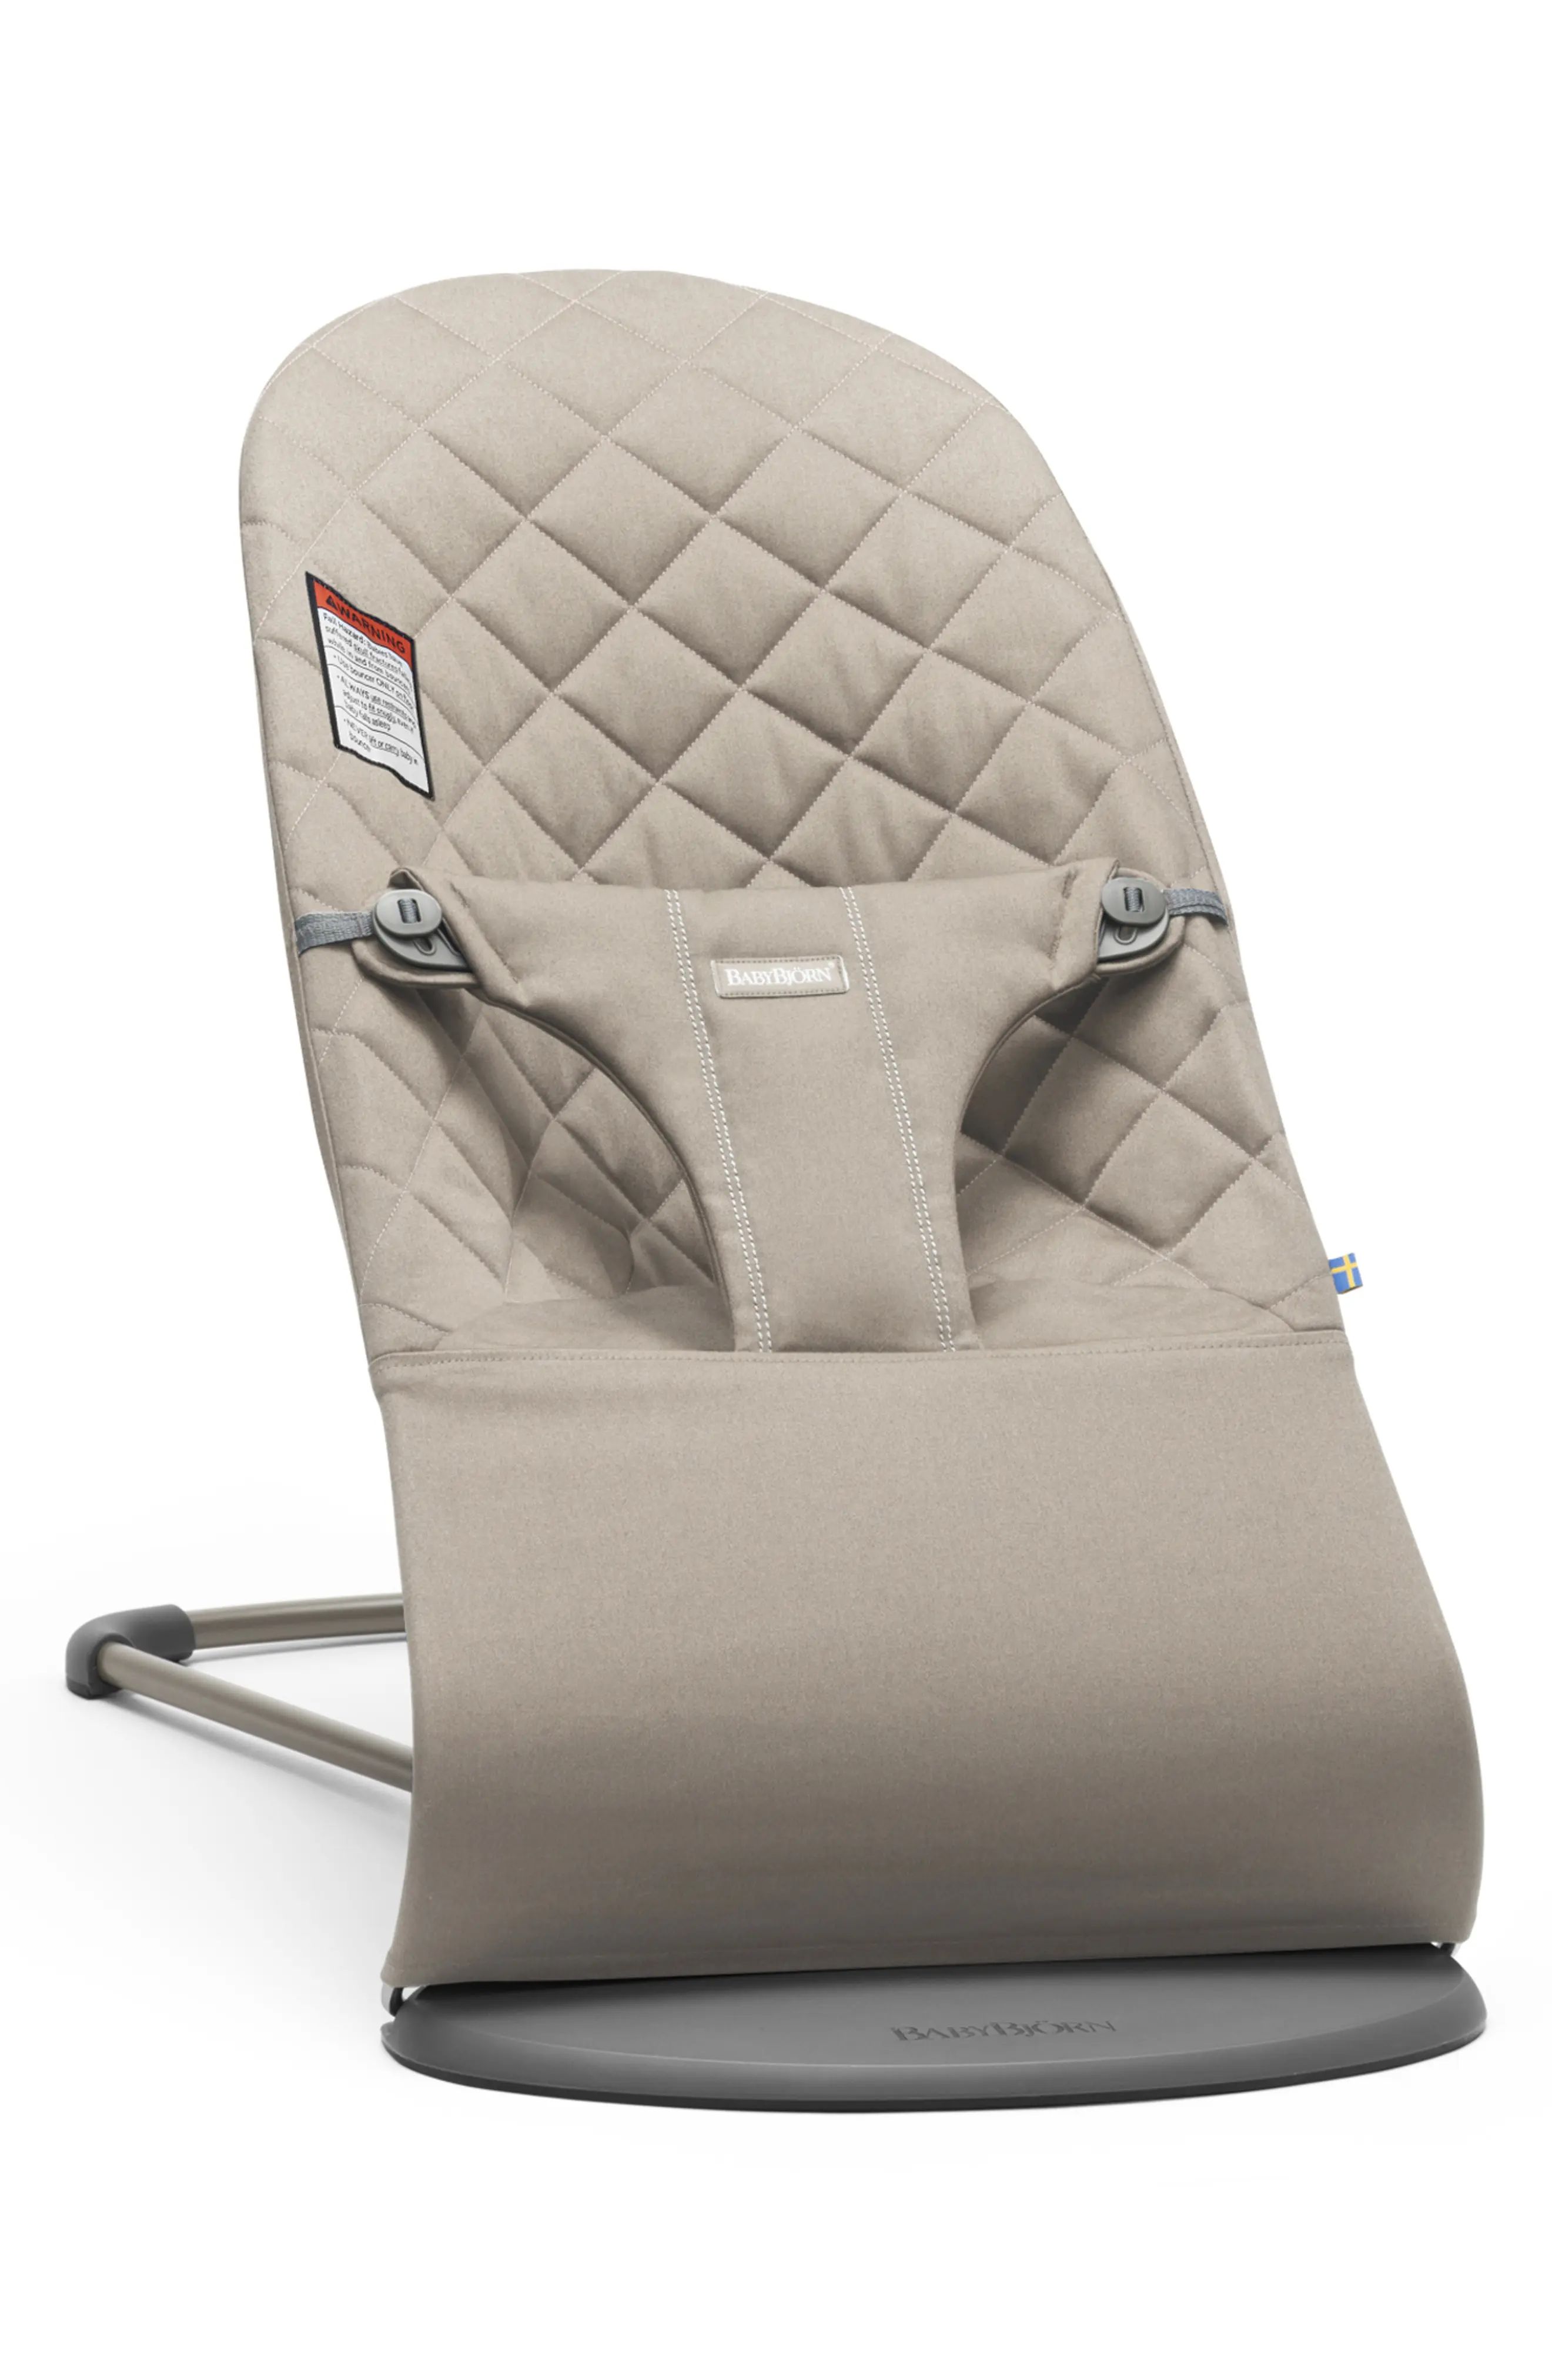 BabyBjorn Bouncer Bliss Convertible Quilted Baby Bouncer in Sand Grey at Nordstrom | Nordstrom